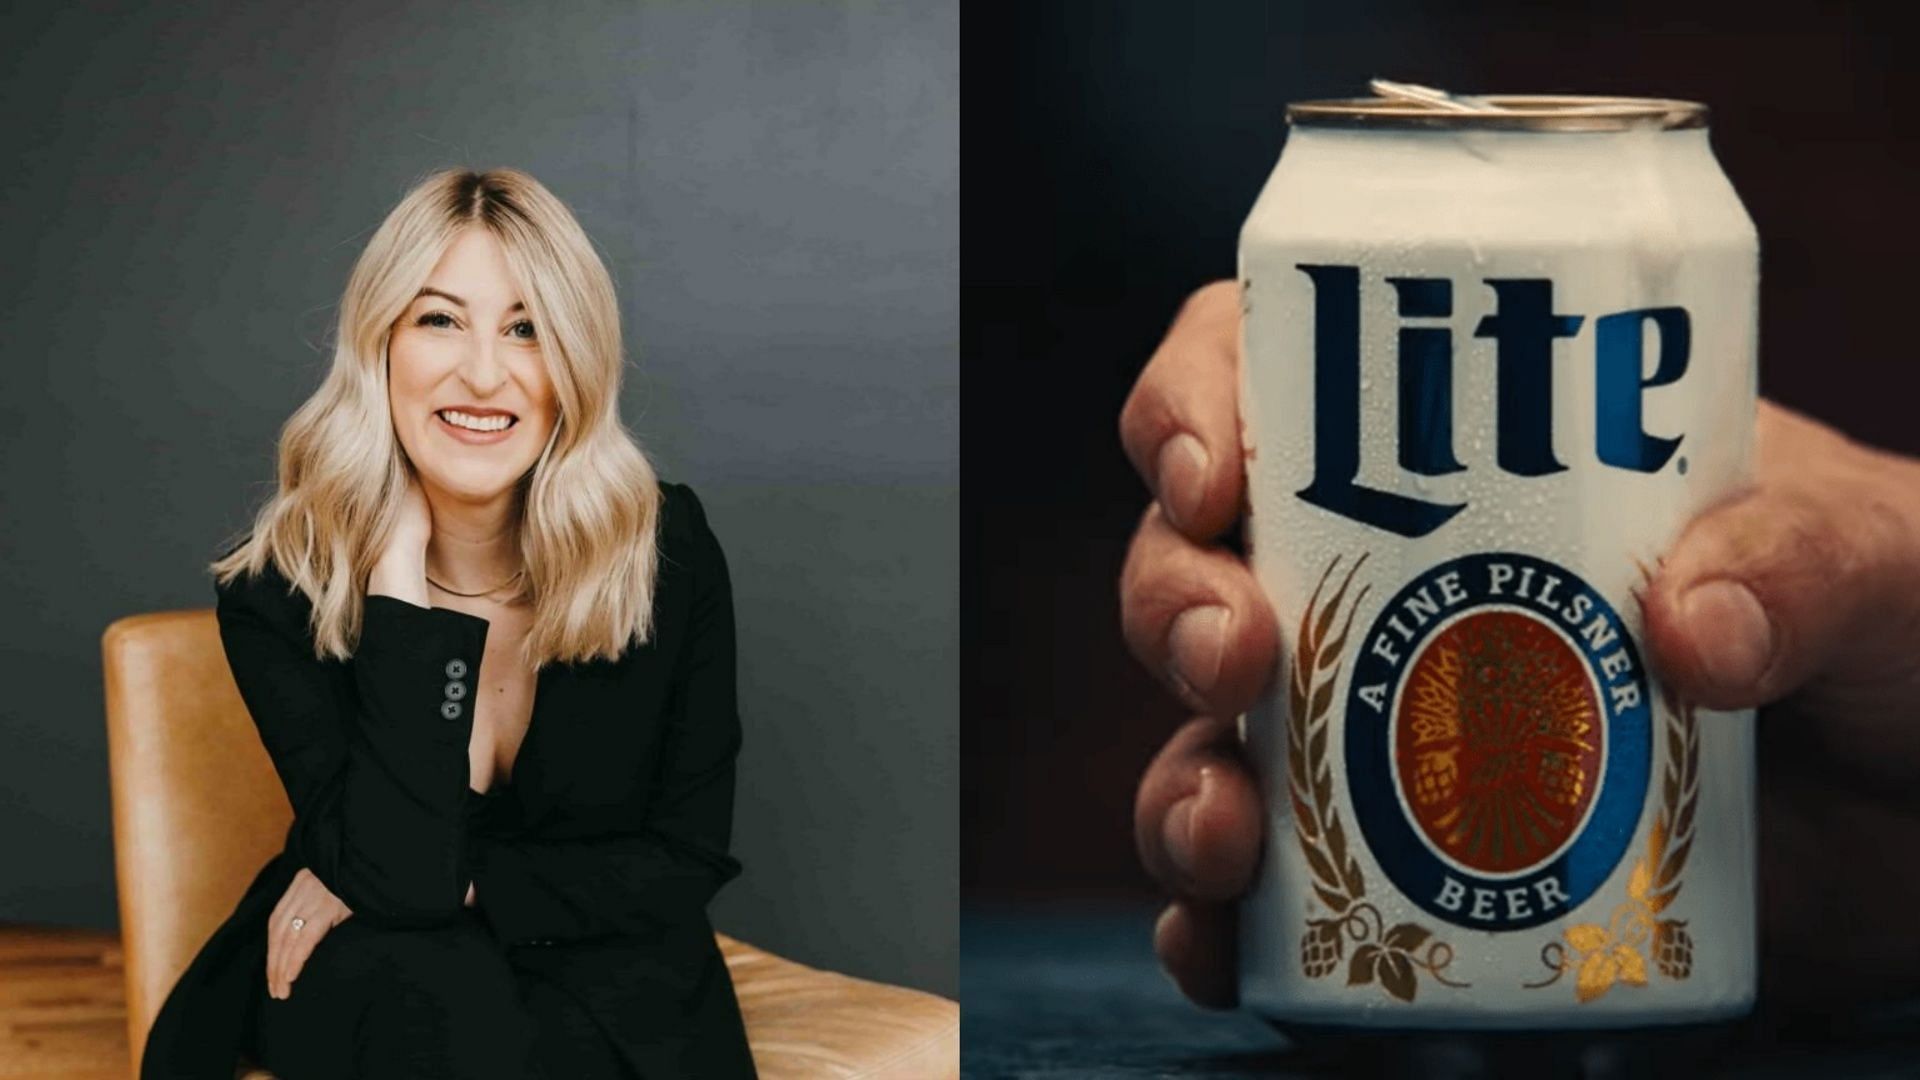 Who is Elizabeth Hitch? Miller Lite beer commercial controversy